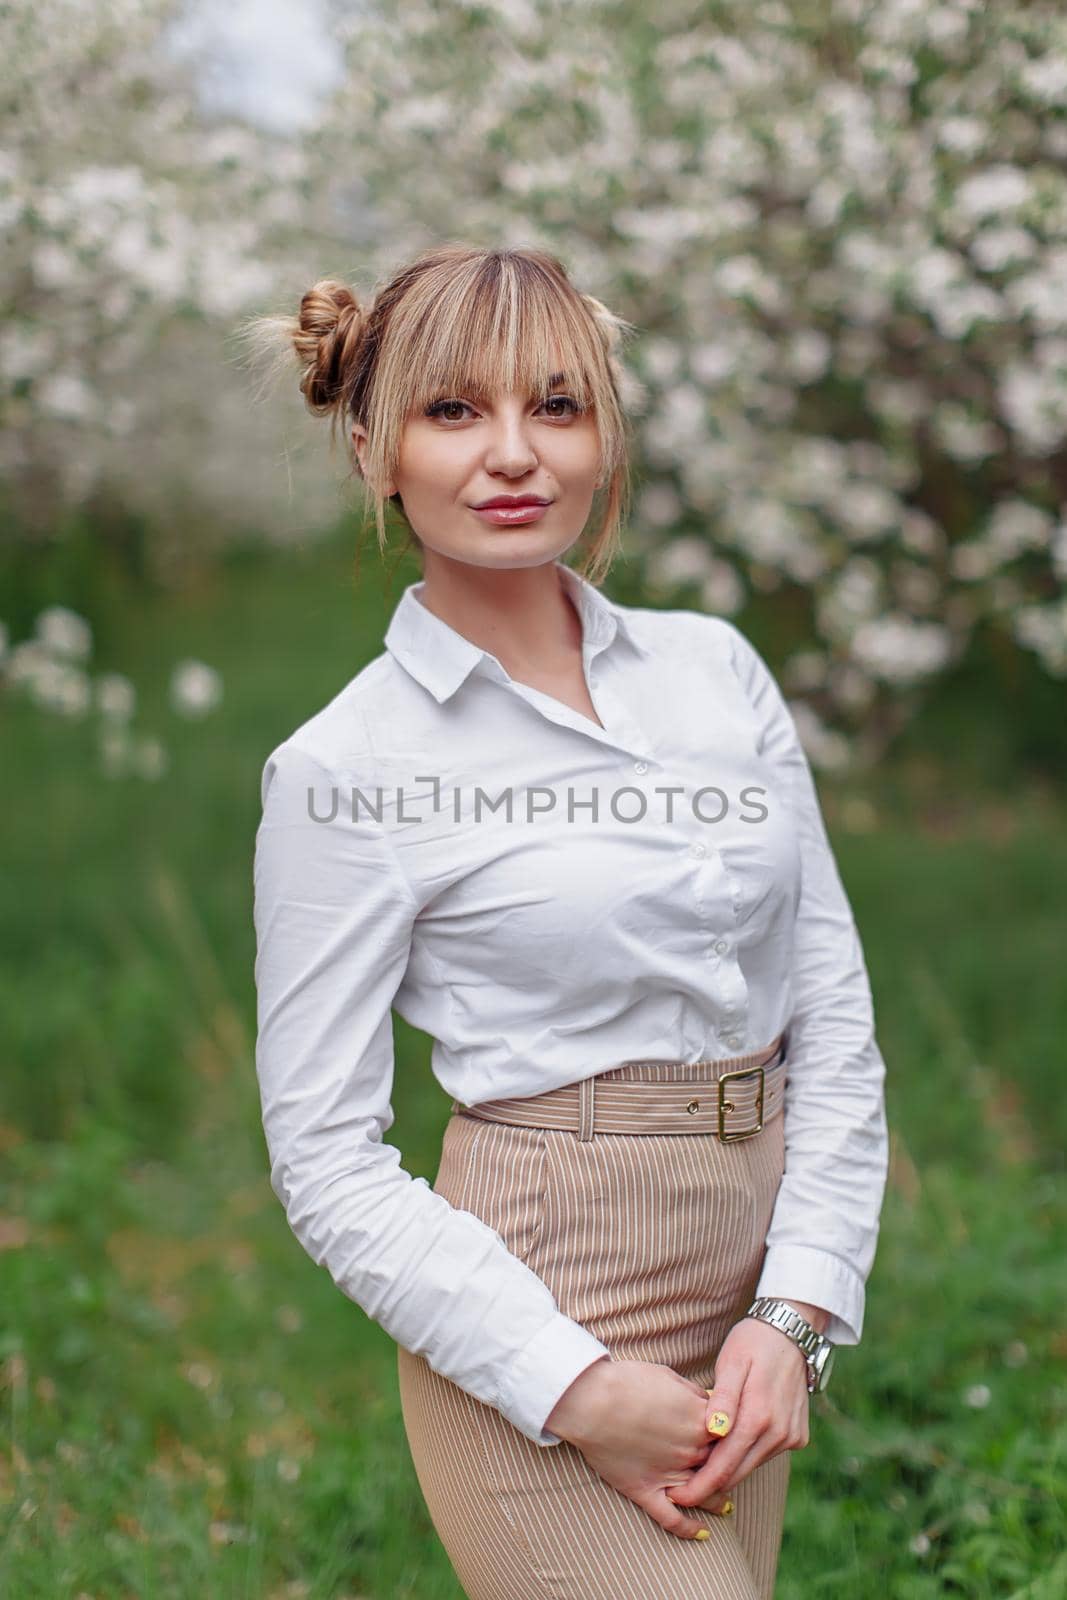 Beautiful young blonde woman in white shirt posing under apple tree in blossom in Spring garden by OnPhotoUa